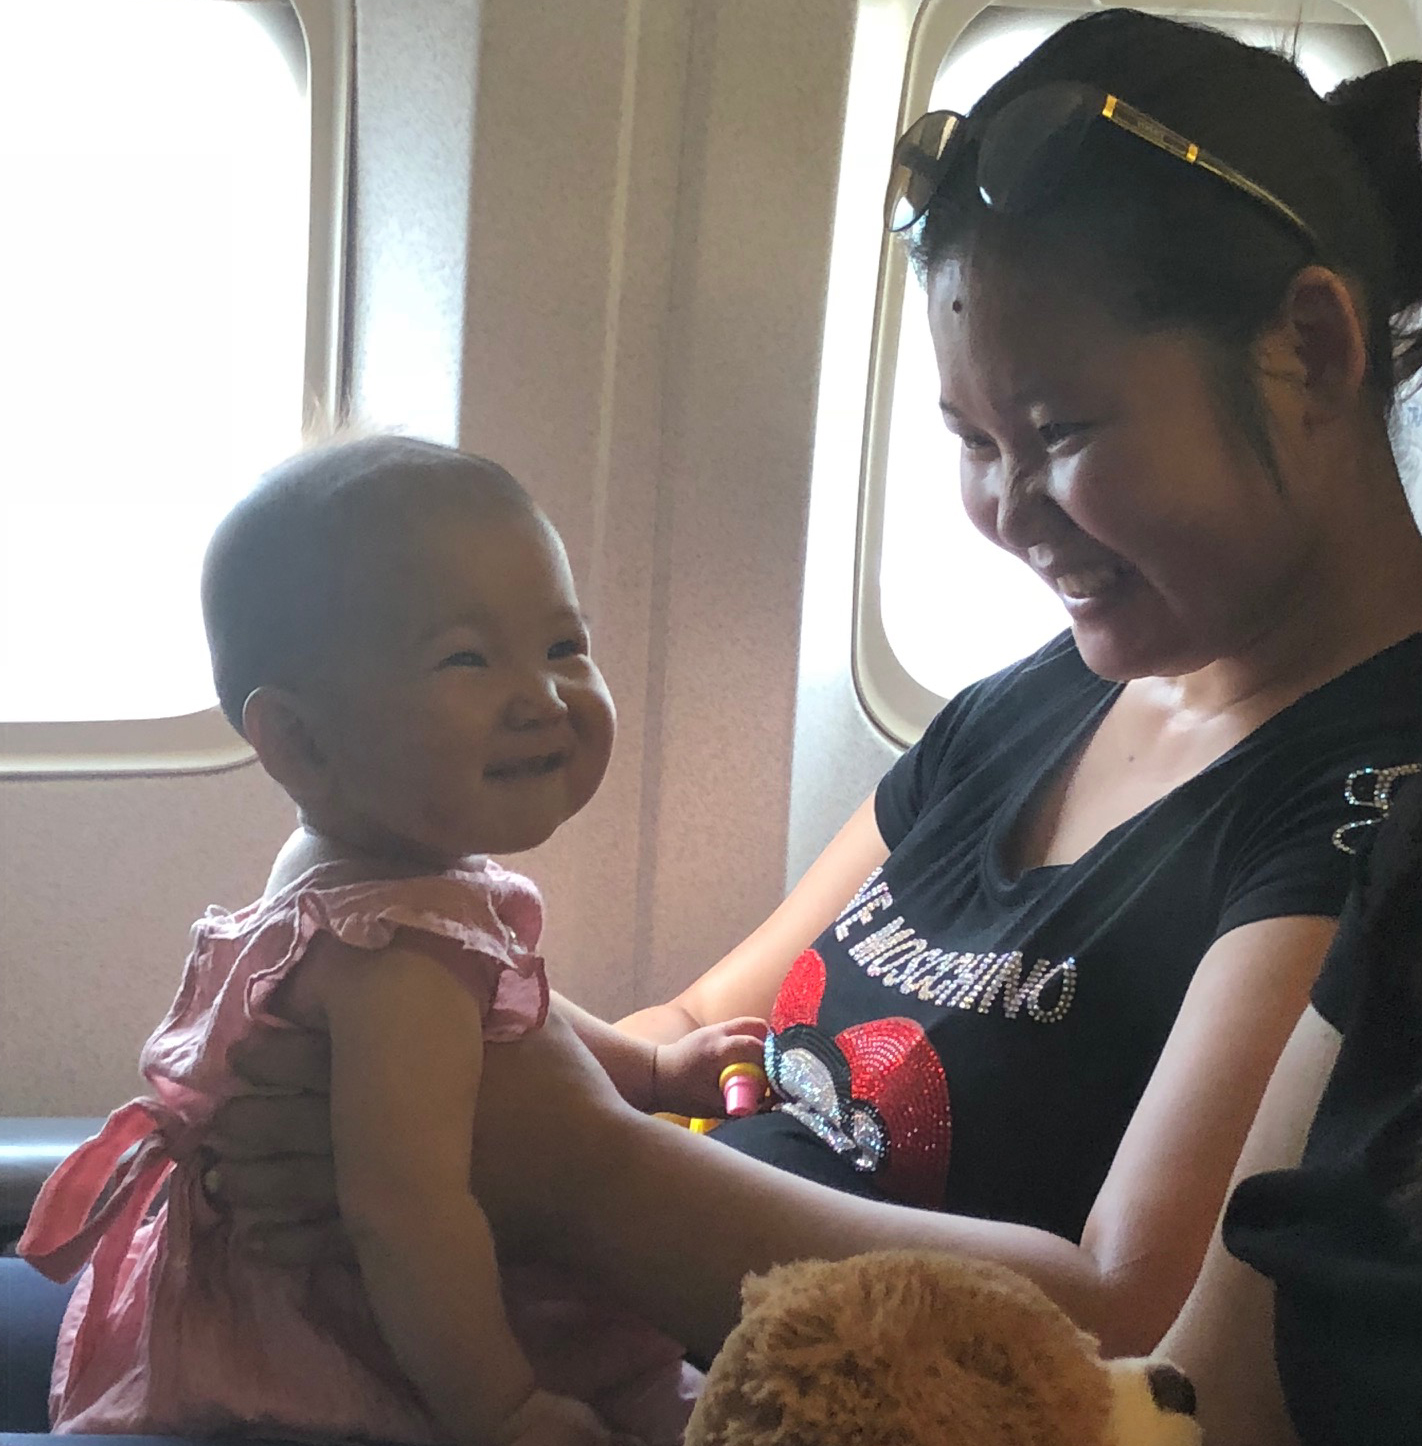 Woman holding baby in her lap in airplane seat